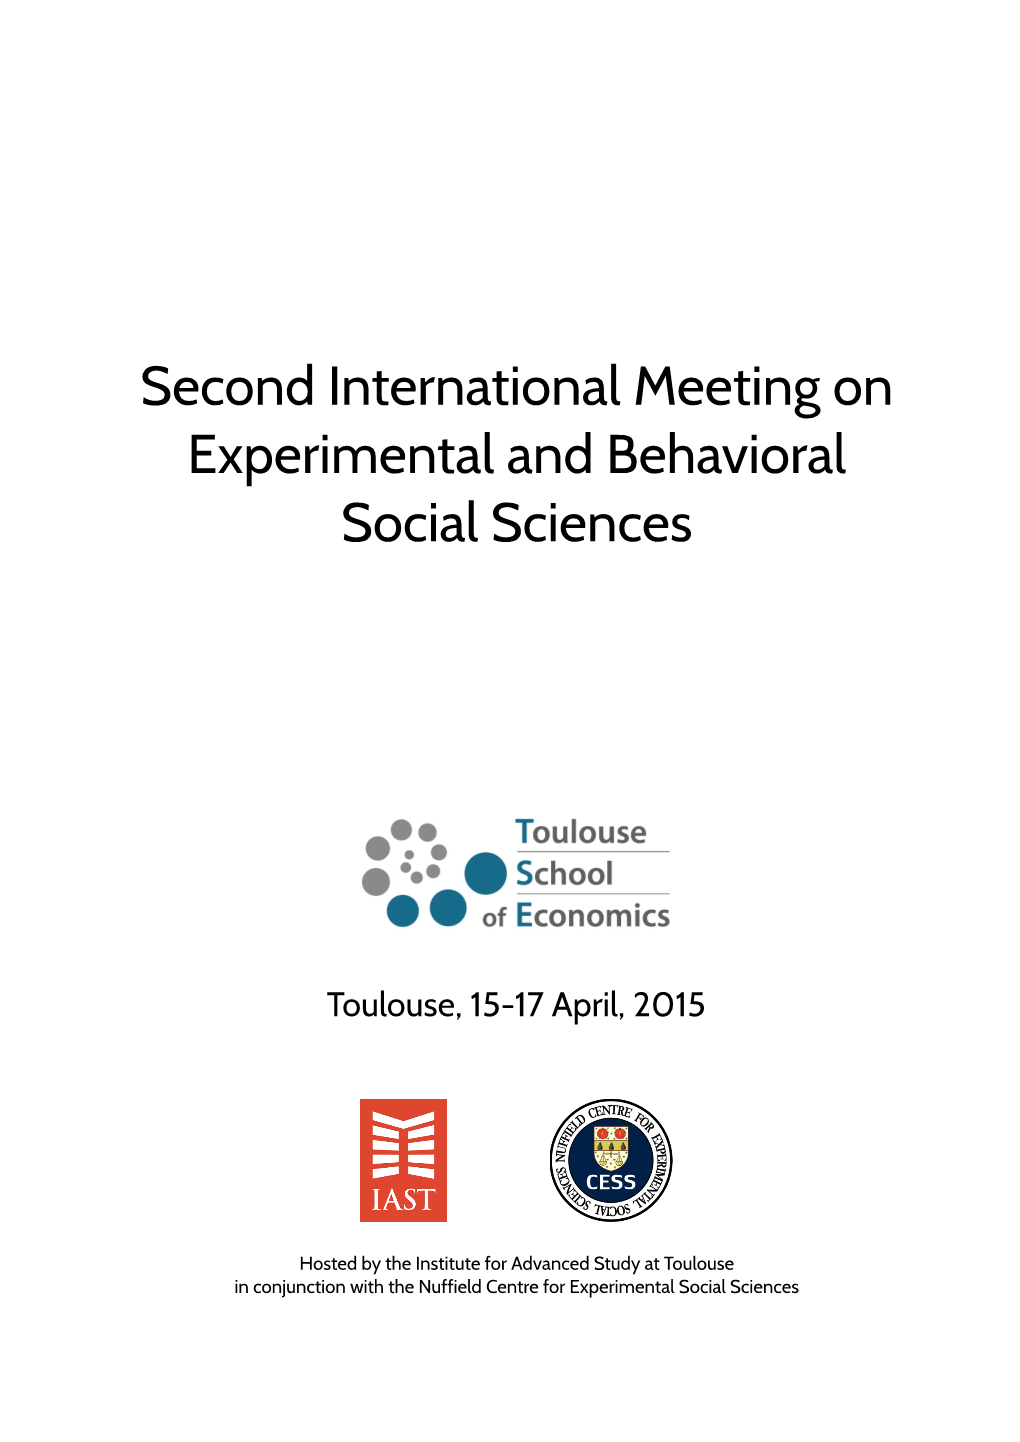 Second International Meeting on Experimental and Behavioral Social Sciences